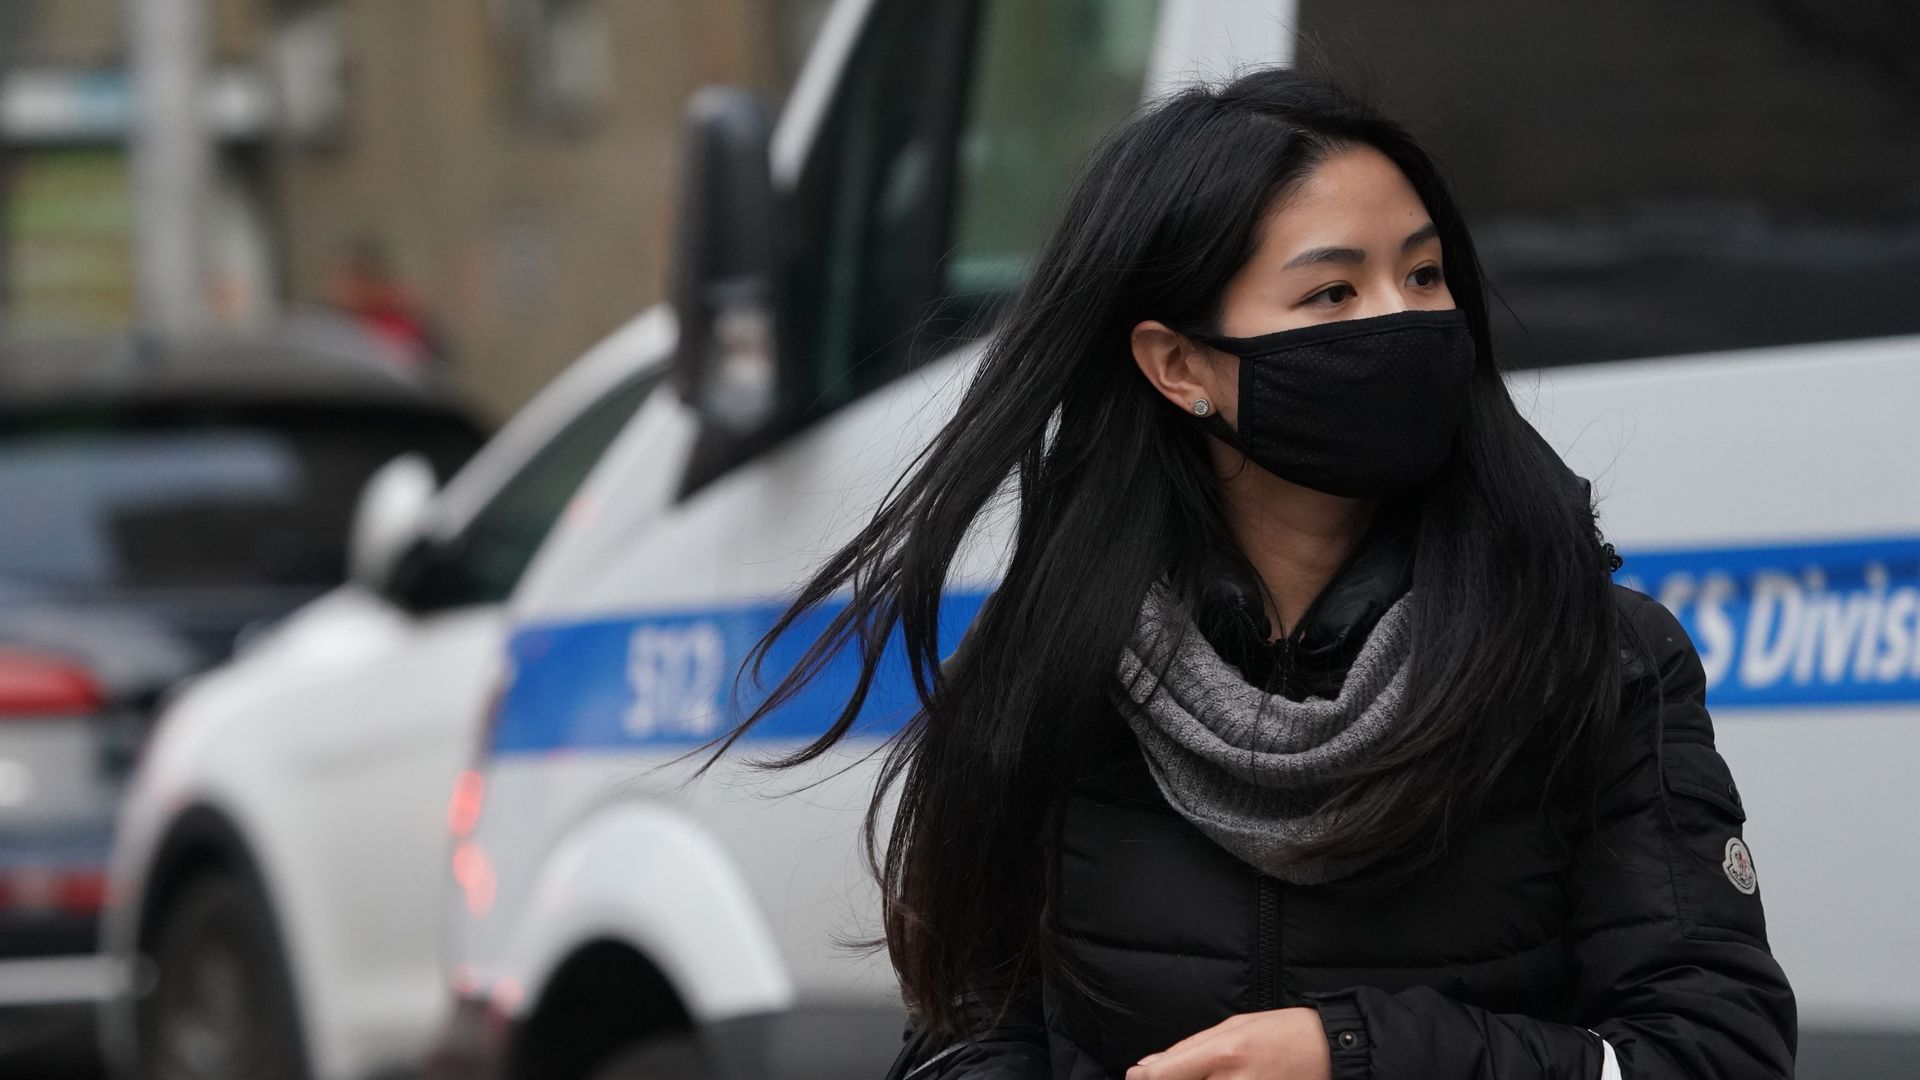 A woman wears a protective mask in New York City.